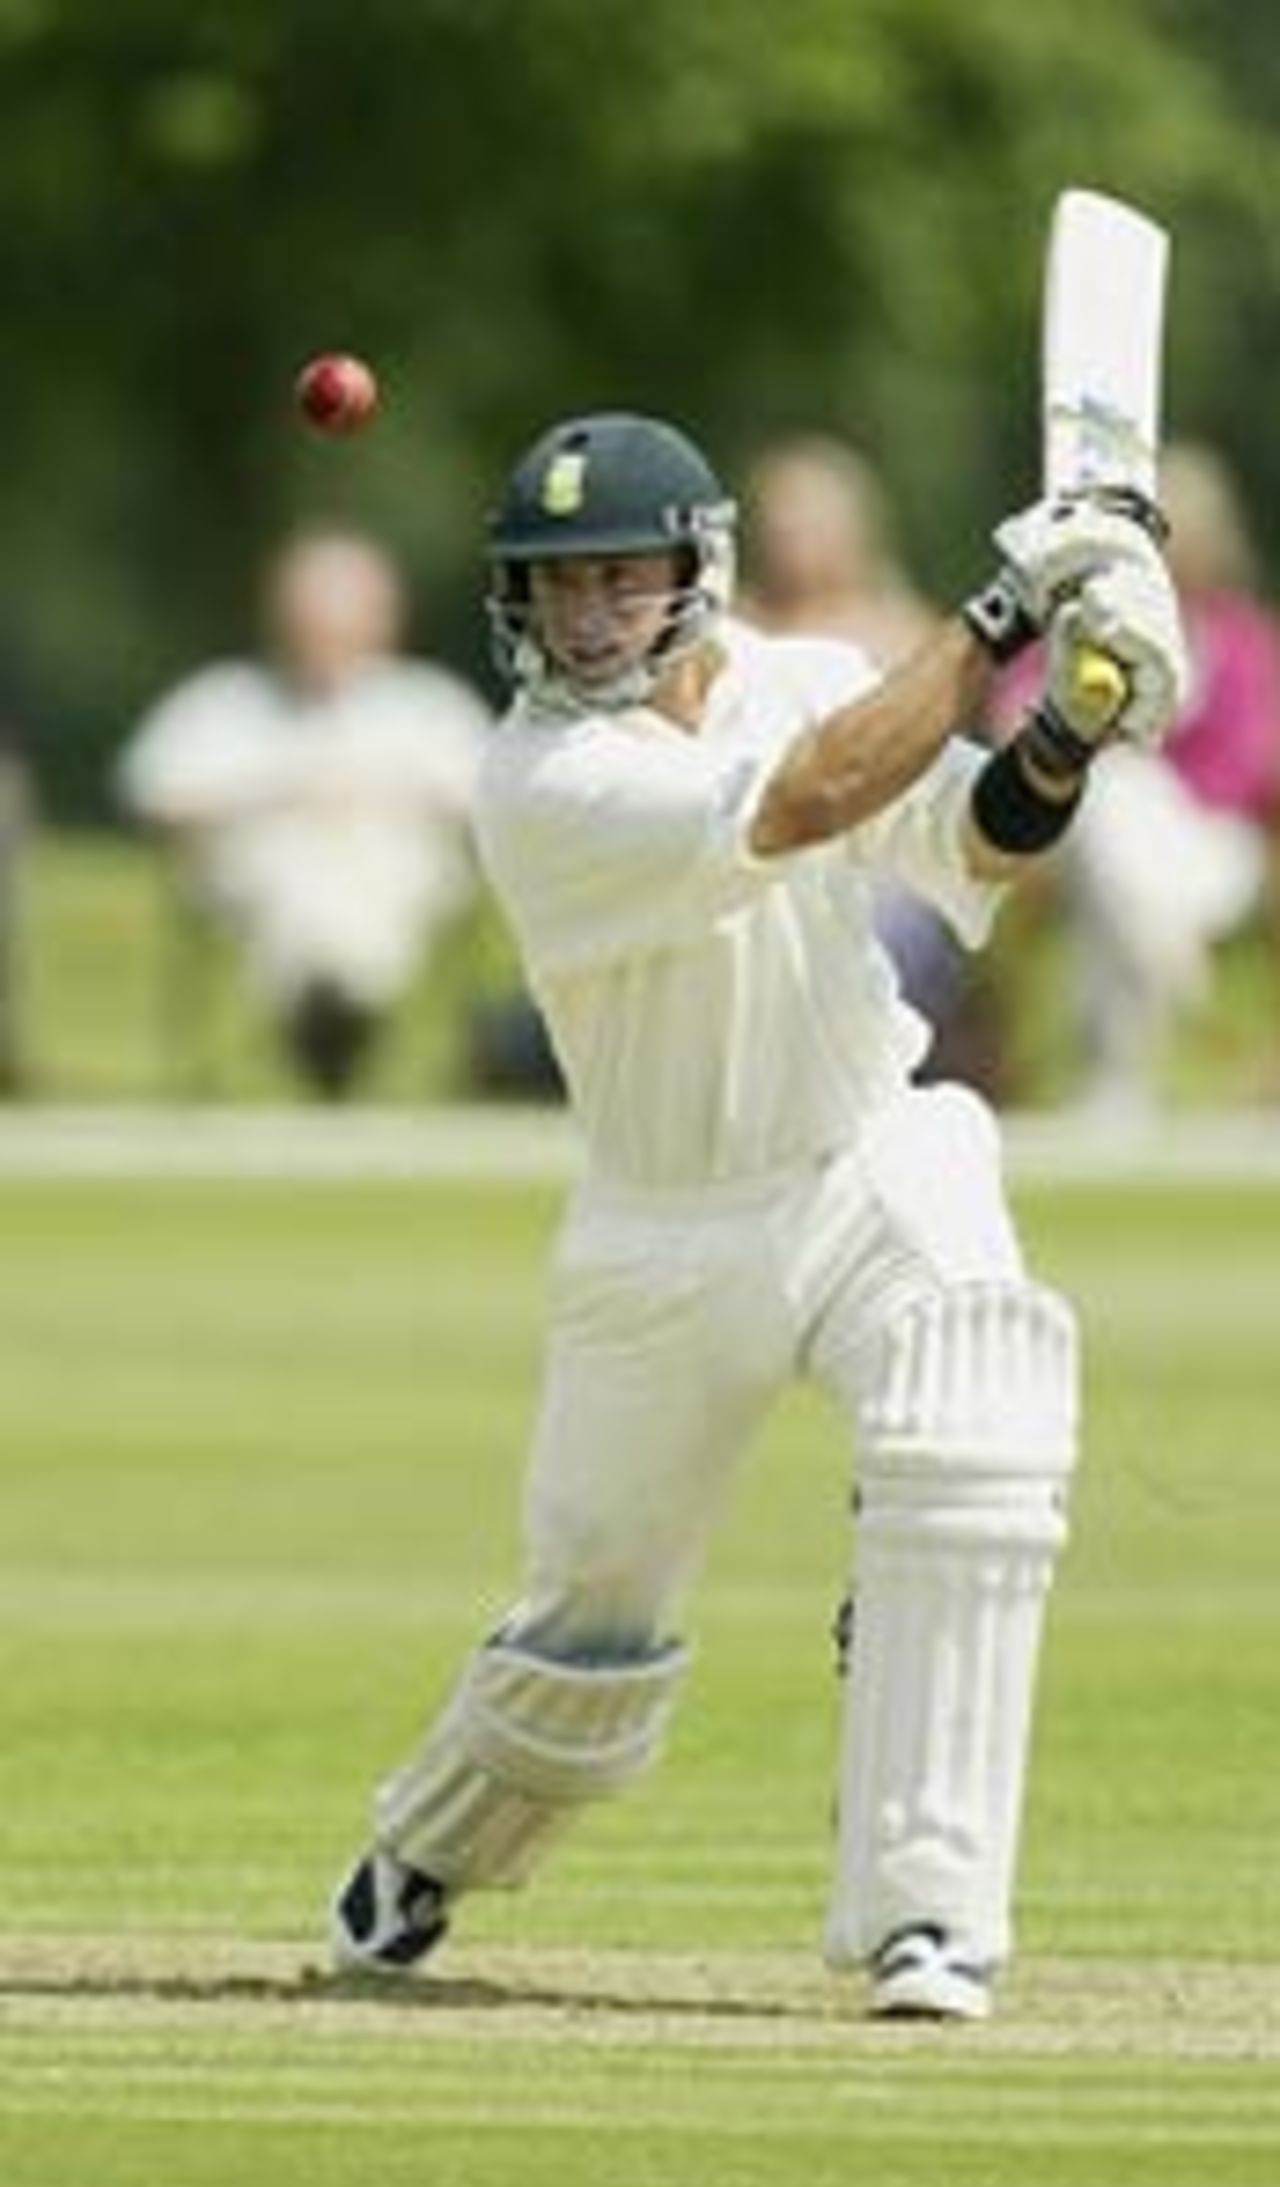 Herschelle Gibbs drives during South Africa's match at Wormsley, June 23, 2003